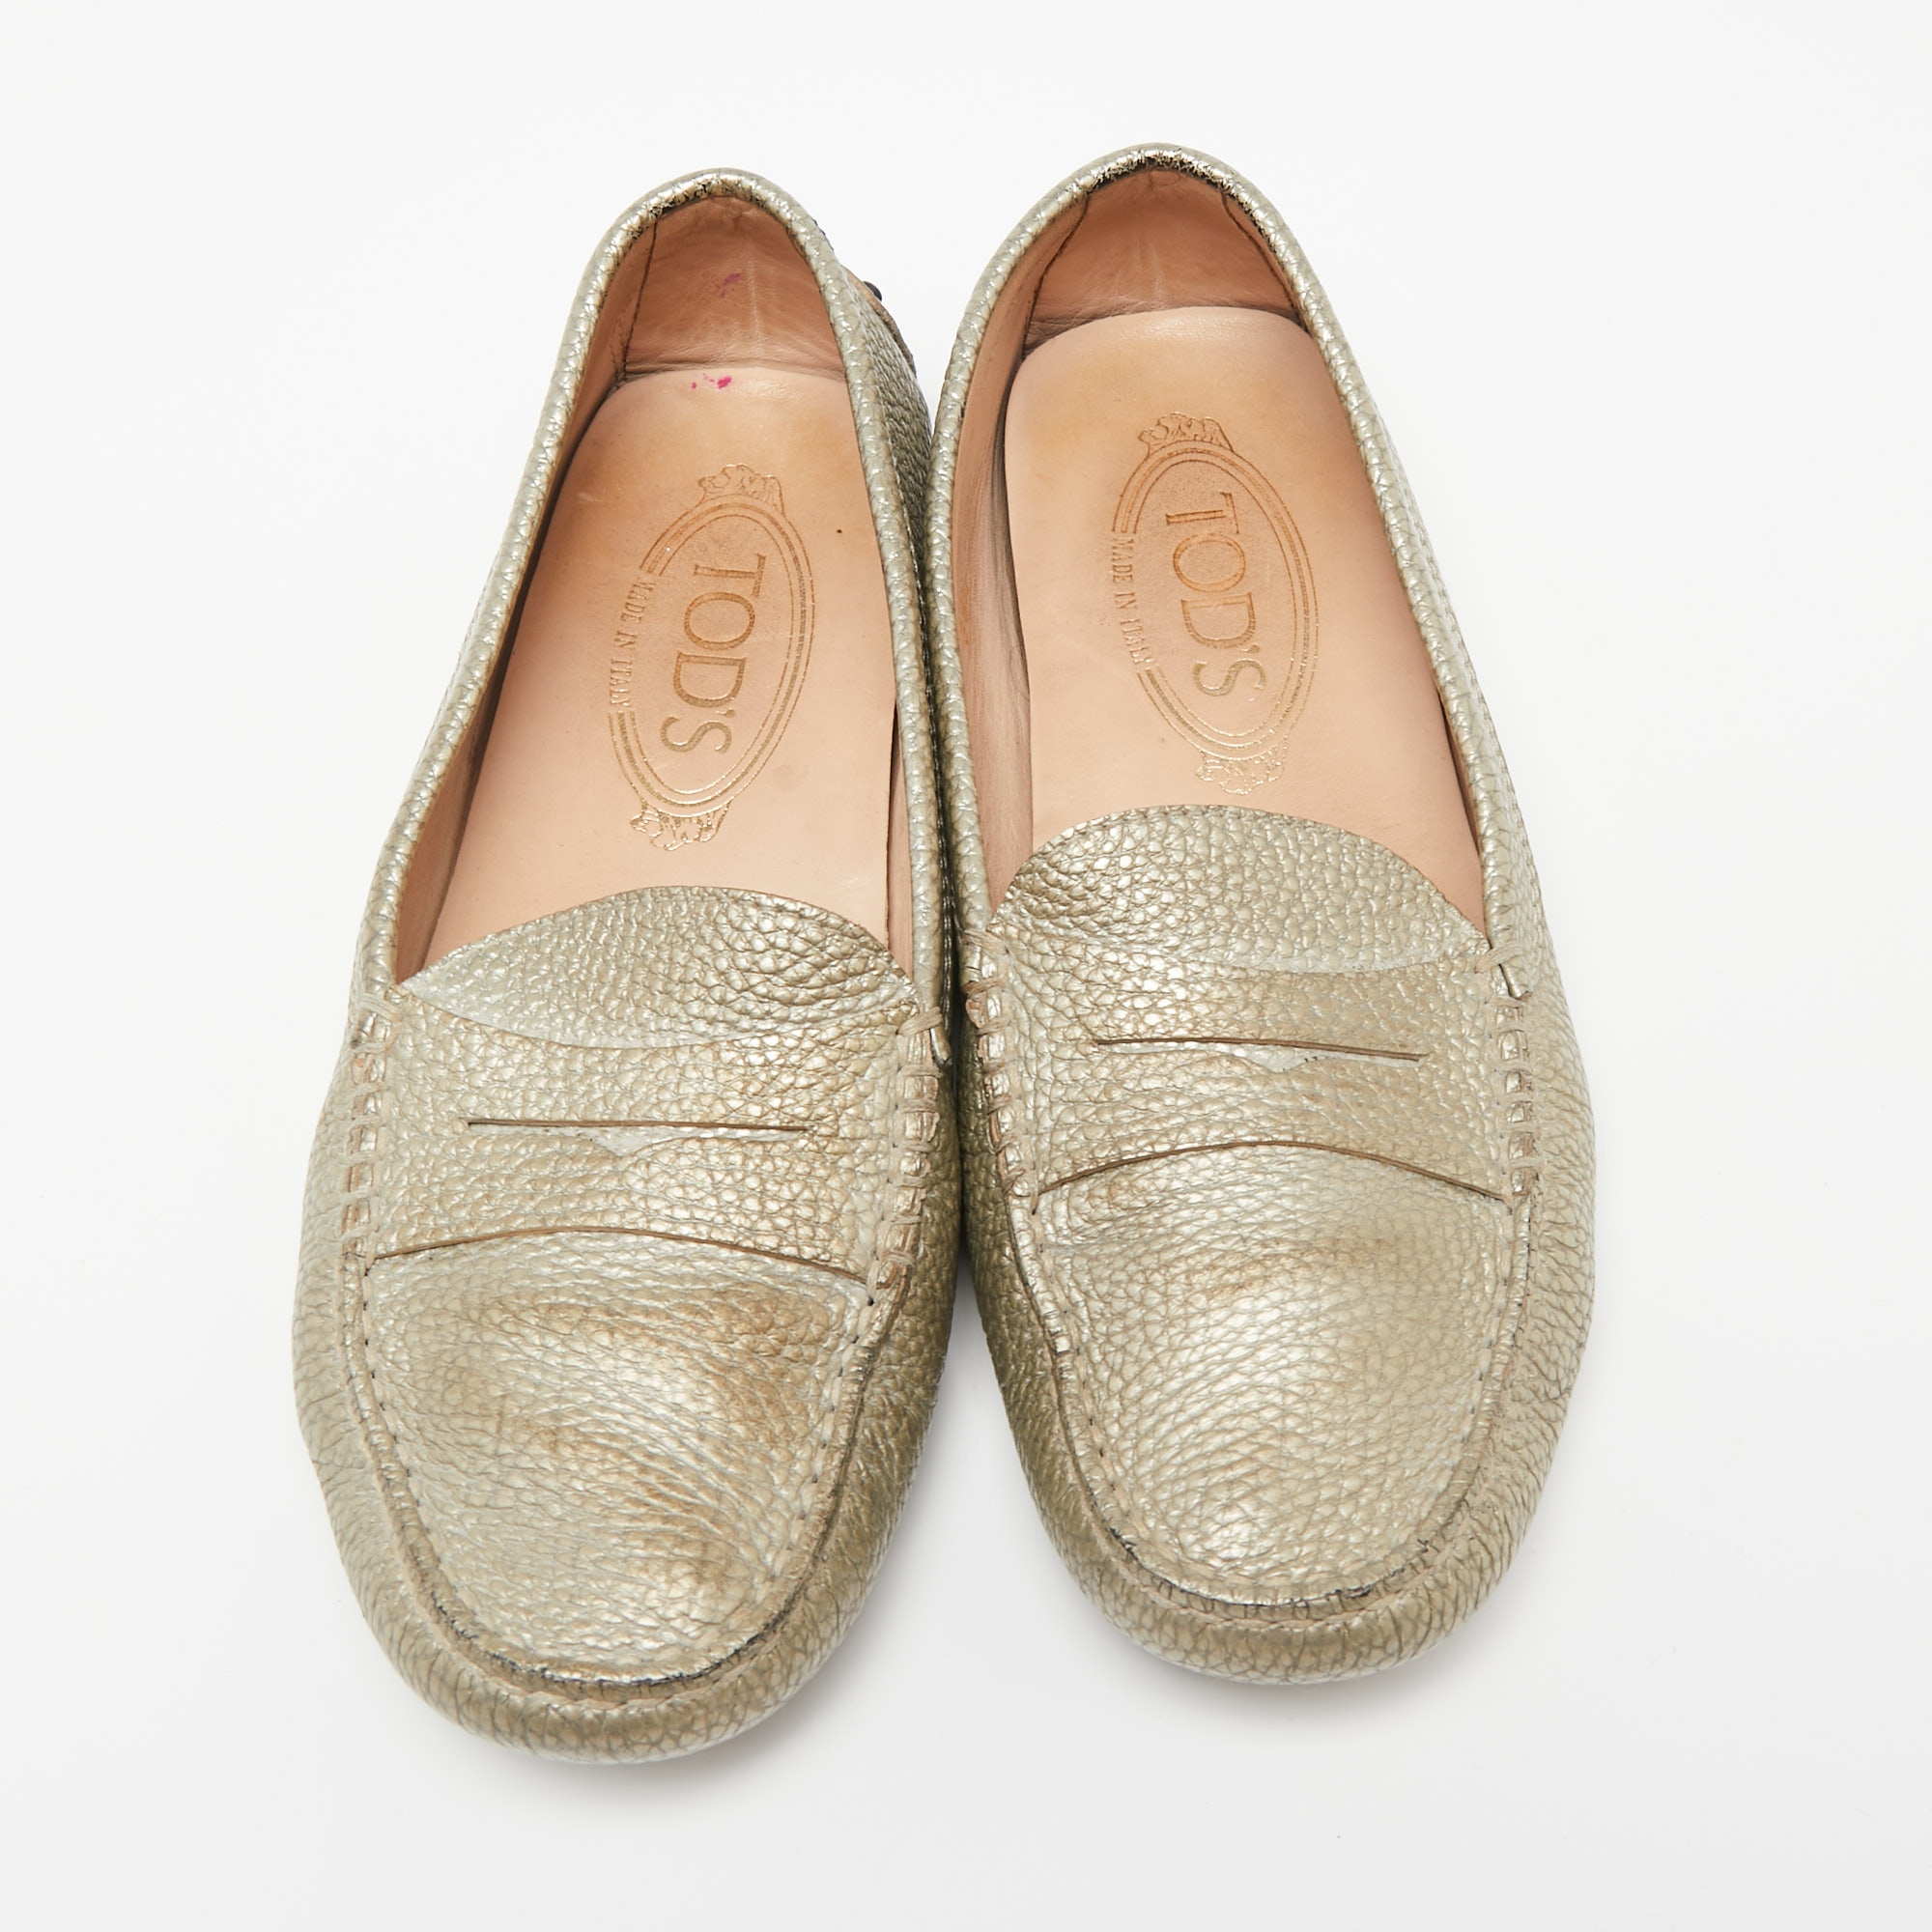 Tod's Metallic Grey Leather Penny Loafers Size 36.5